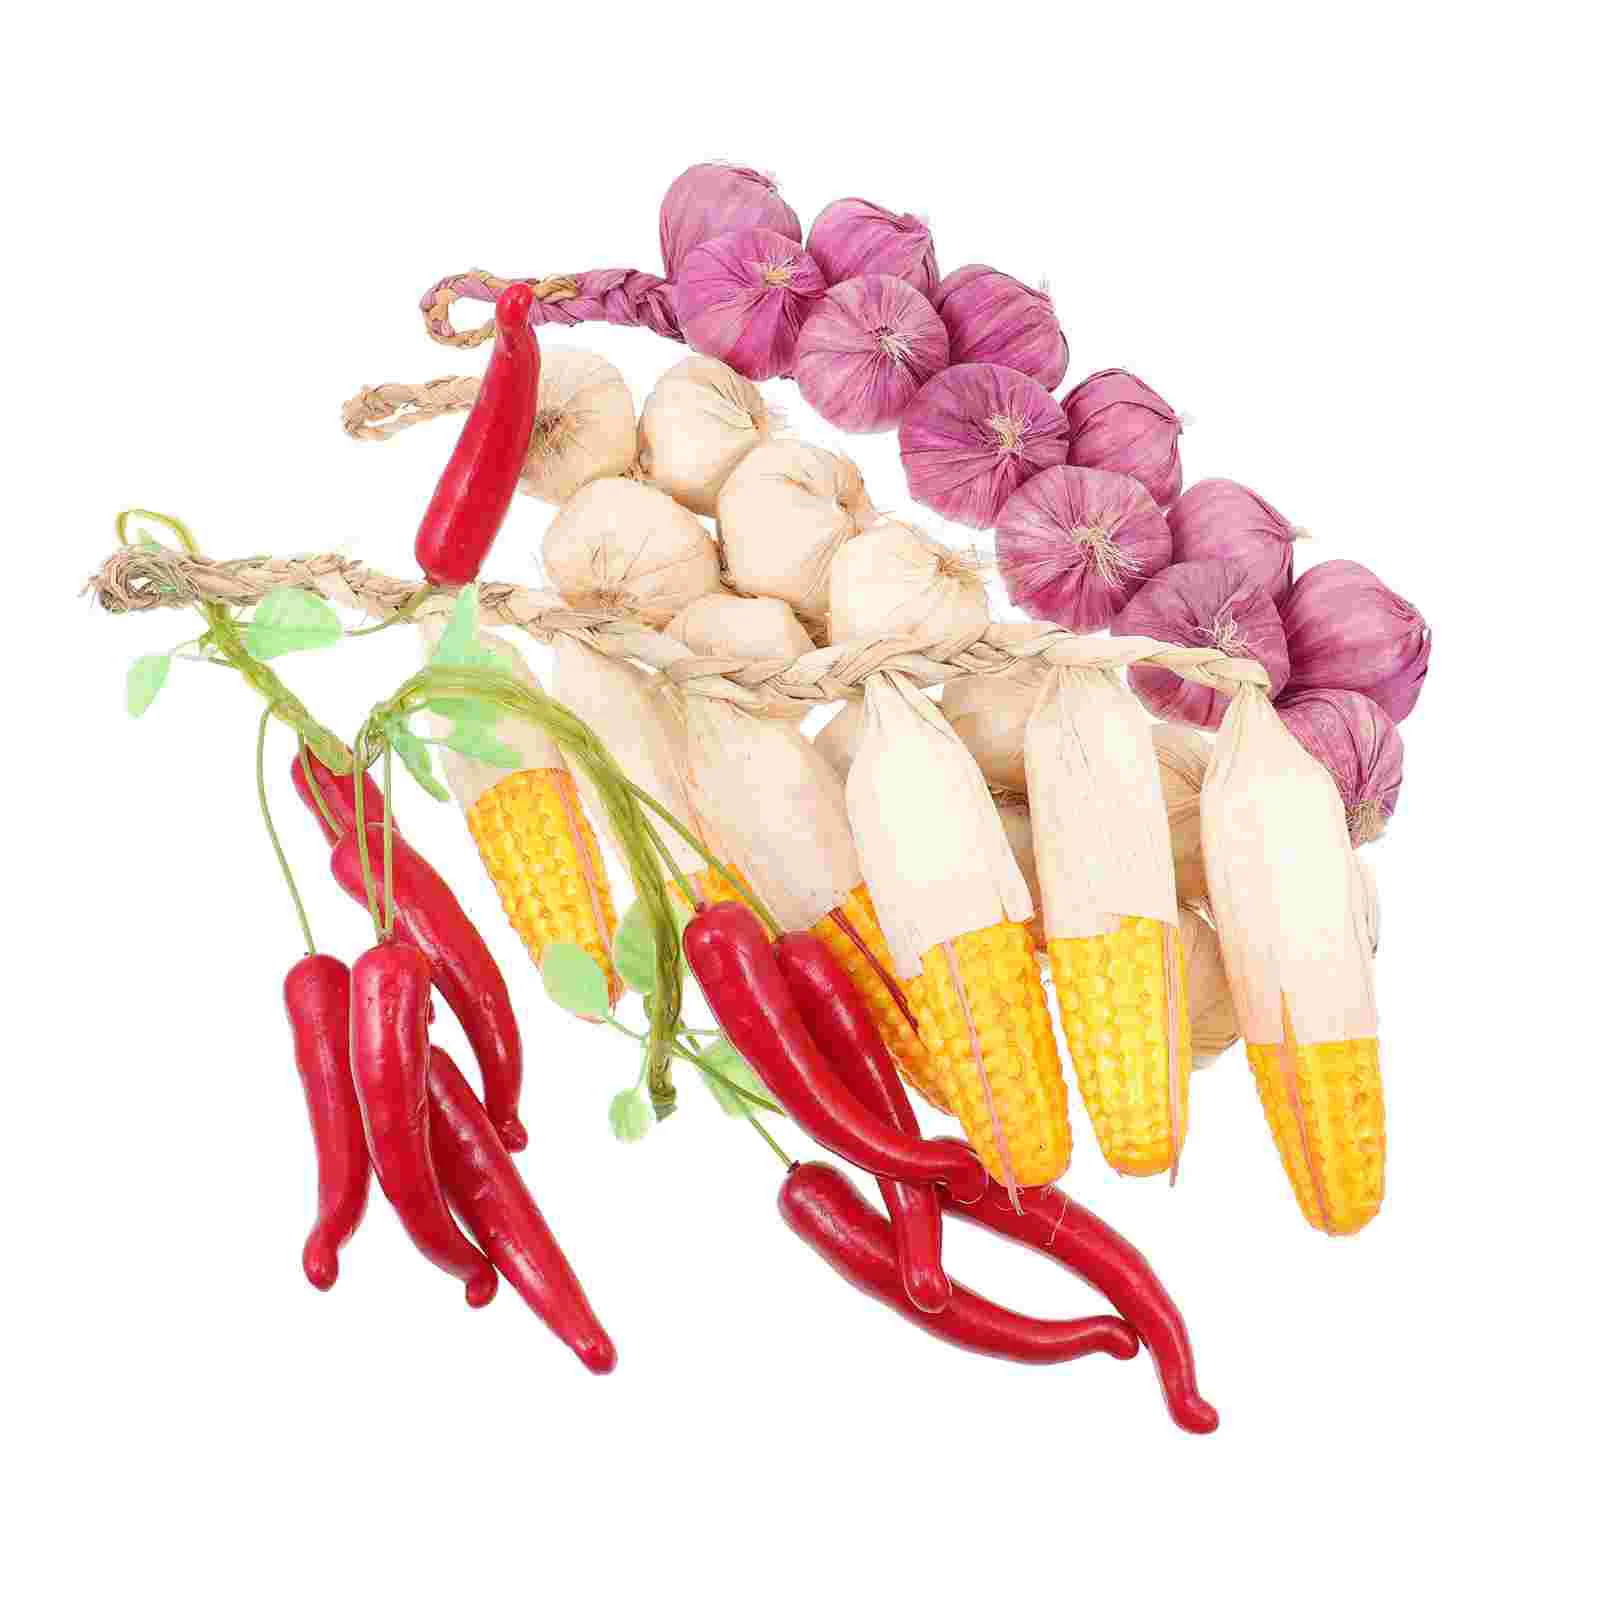 

4 Pcs Home Rustic Home Decors Simulated Garlic Hanging Skewers Vegetable Farmhouse Decor Onion Fake Peppers Foam Photo Props